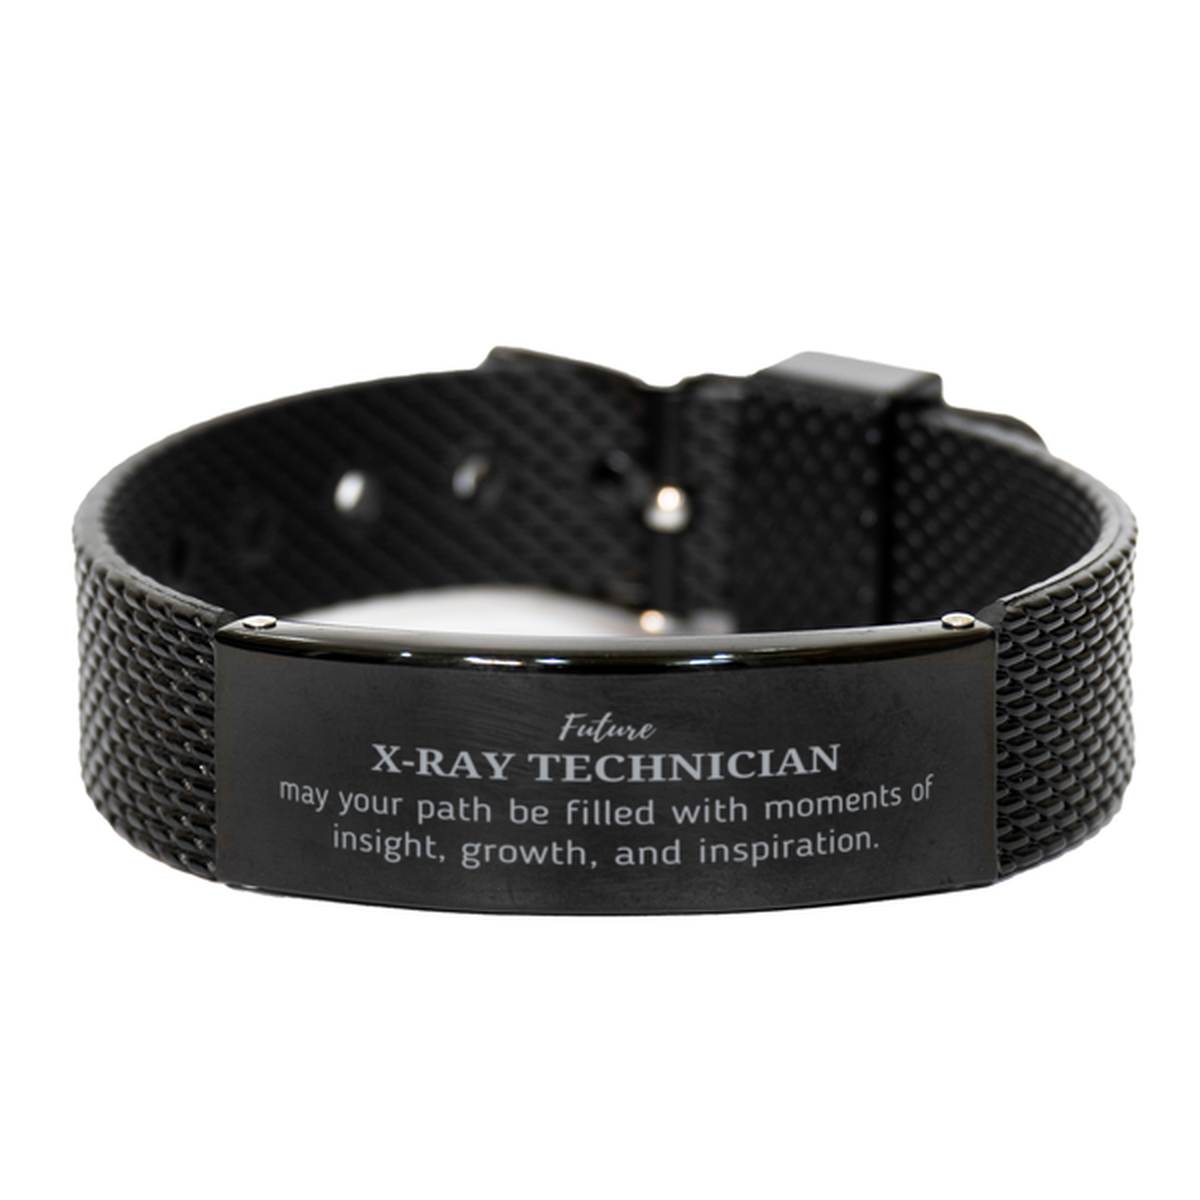 Future X-Ray Technician Gifts, May your path be filled with moments of insight, Graduation Gifts for New X-Ray Technician, Christmas Unique Black Shark Mesh Bracelet For Men, Women, Friends